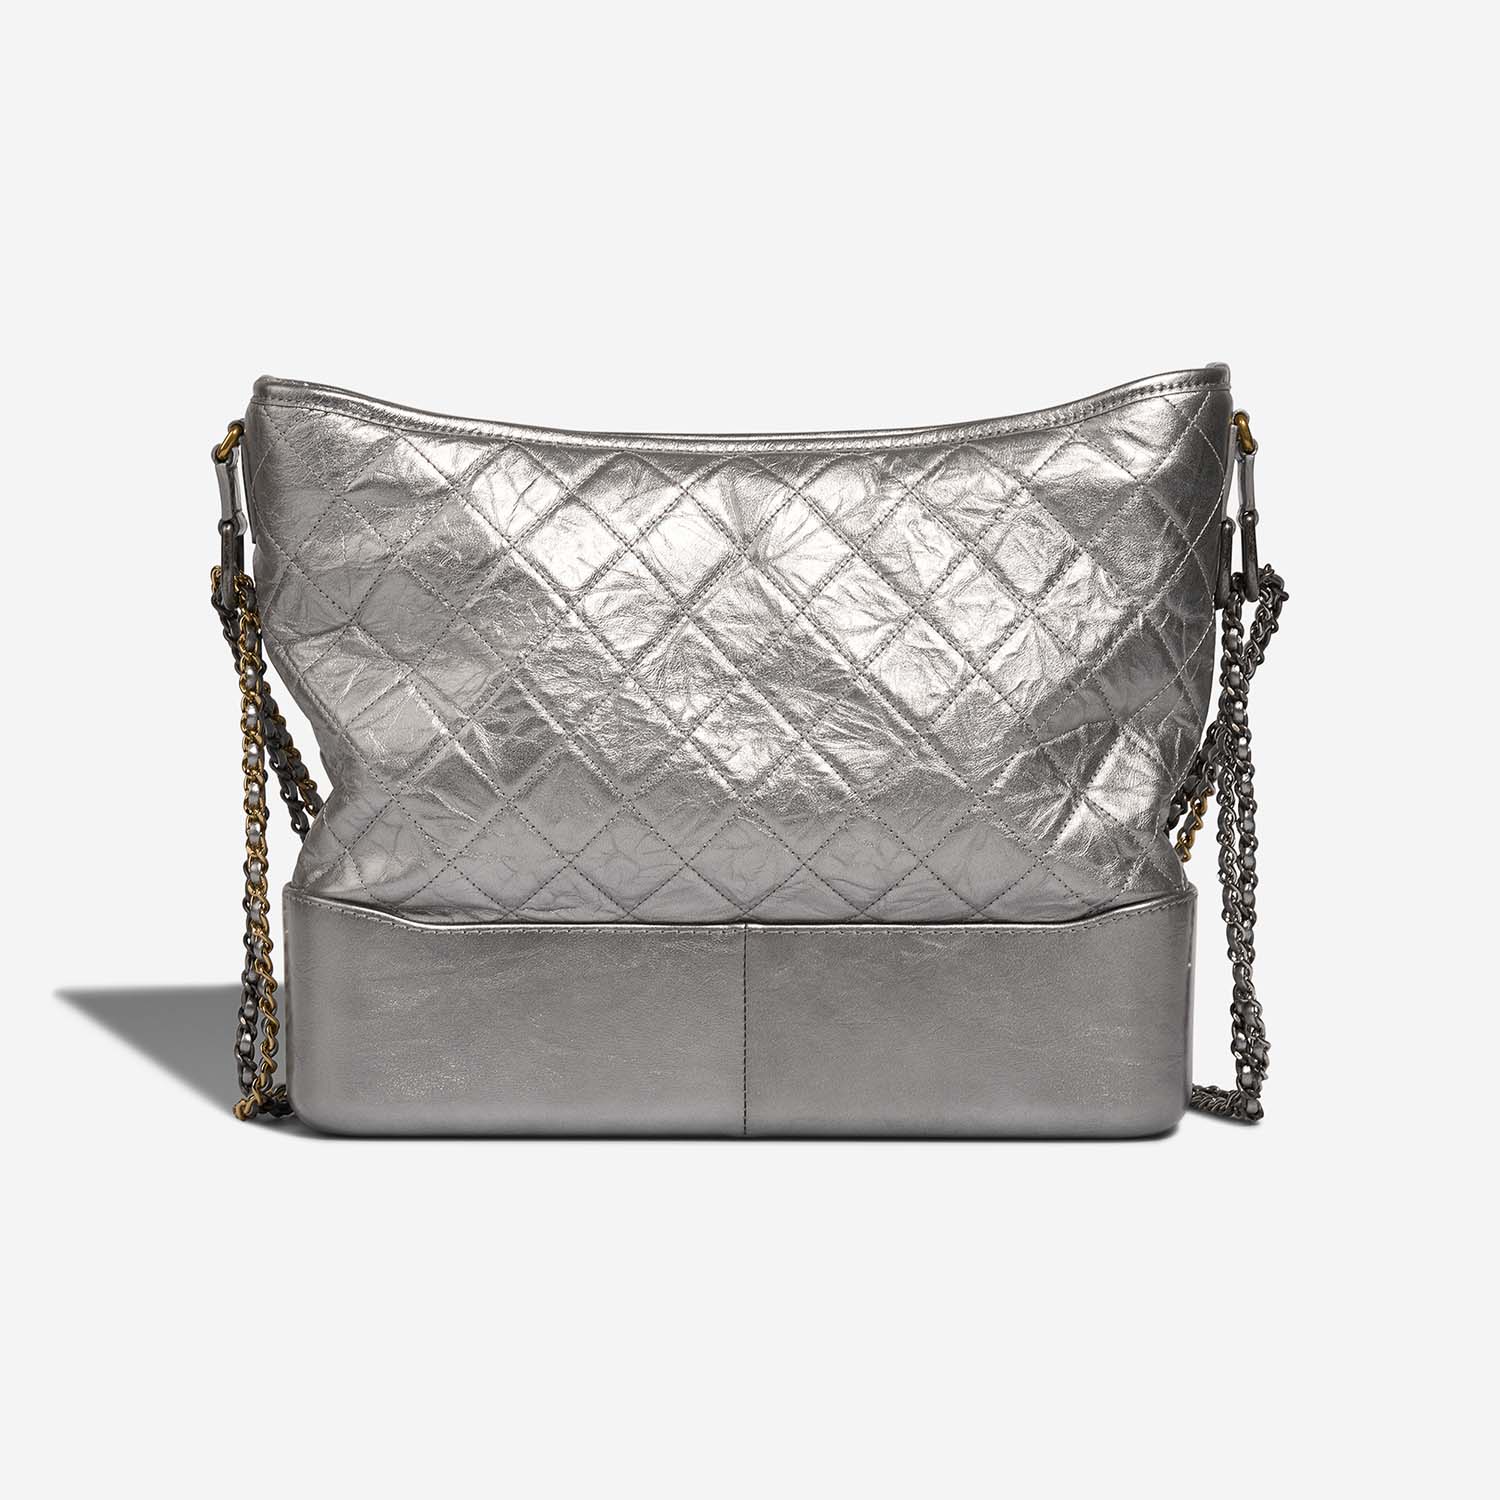 Chanel Gabrielle Large Silver Back | Sell your designer bag on Saclab.com